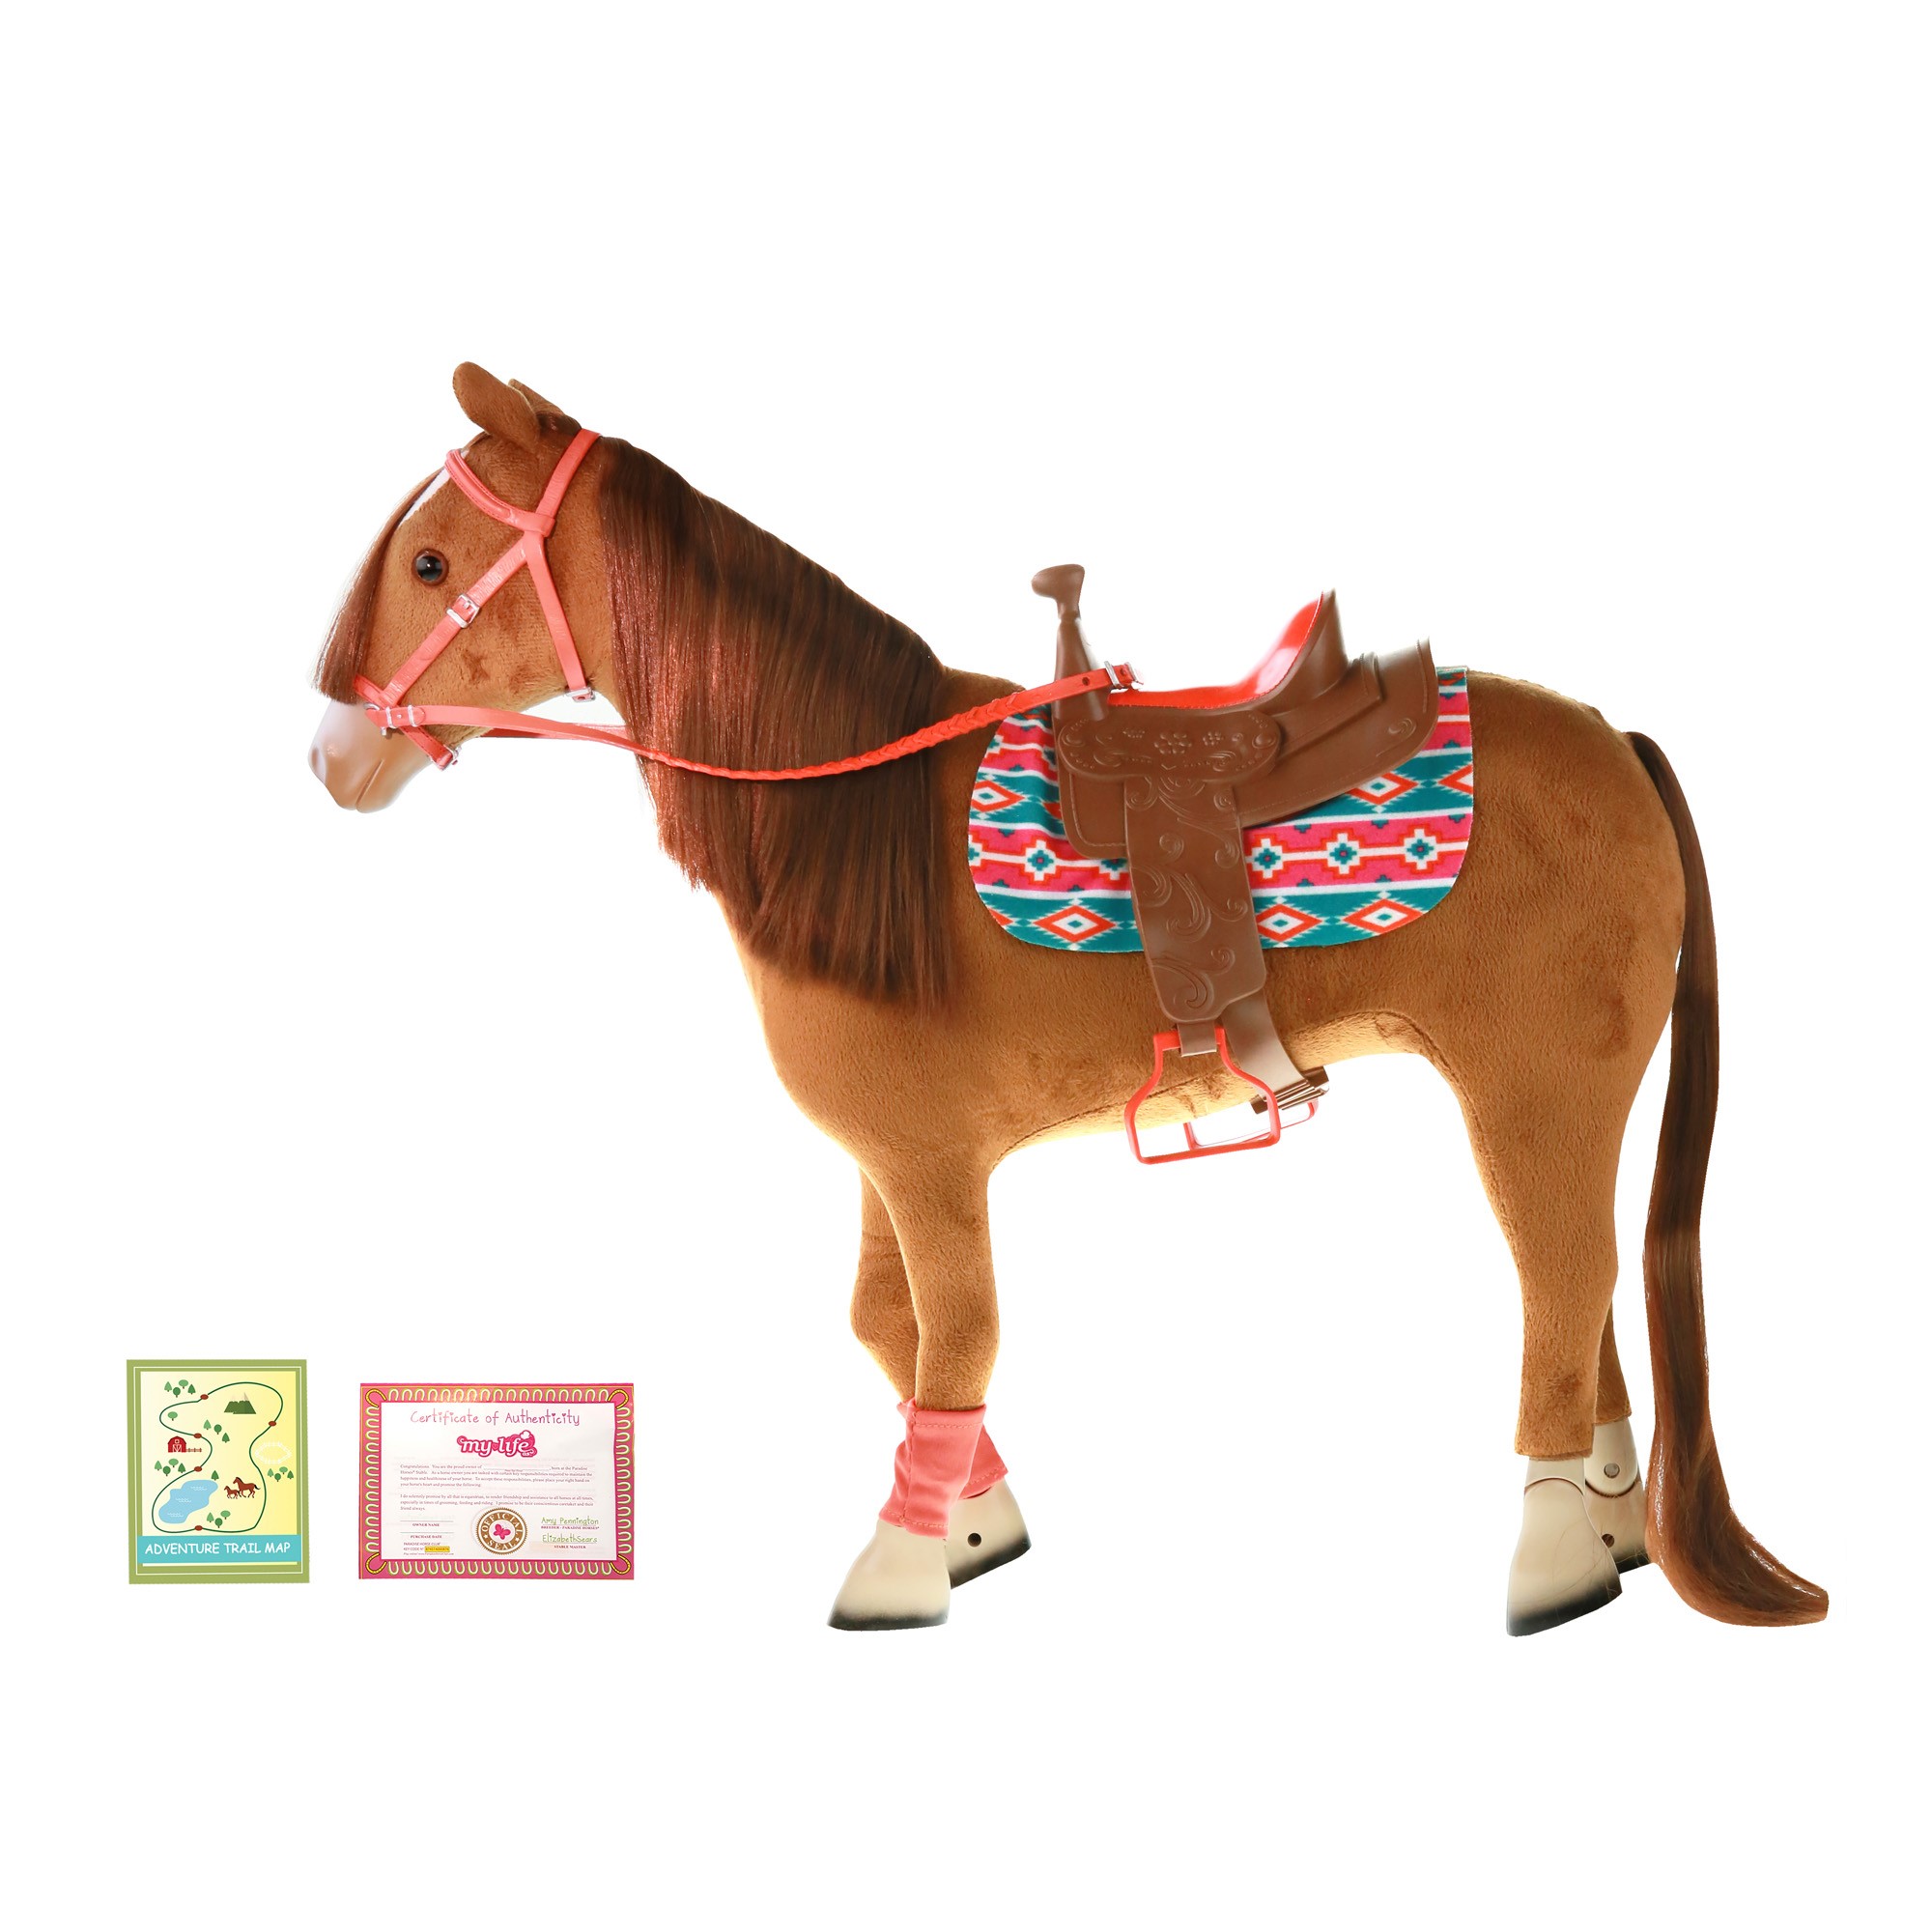 My Life As Poseable Horse Play Set Doll Accessories, 9 Pieces - image 1 of 2